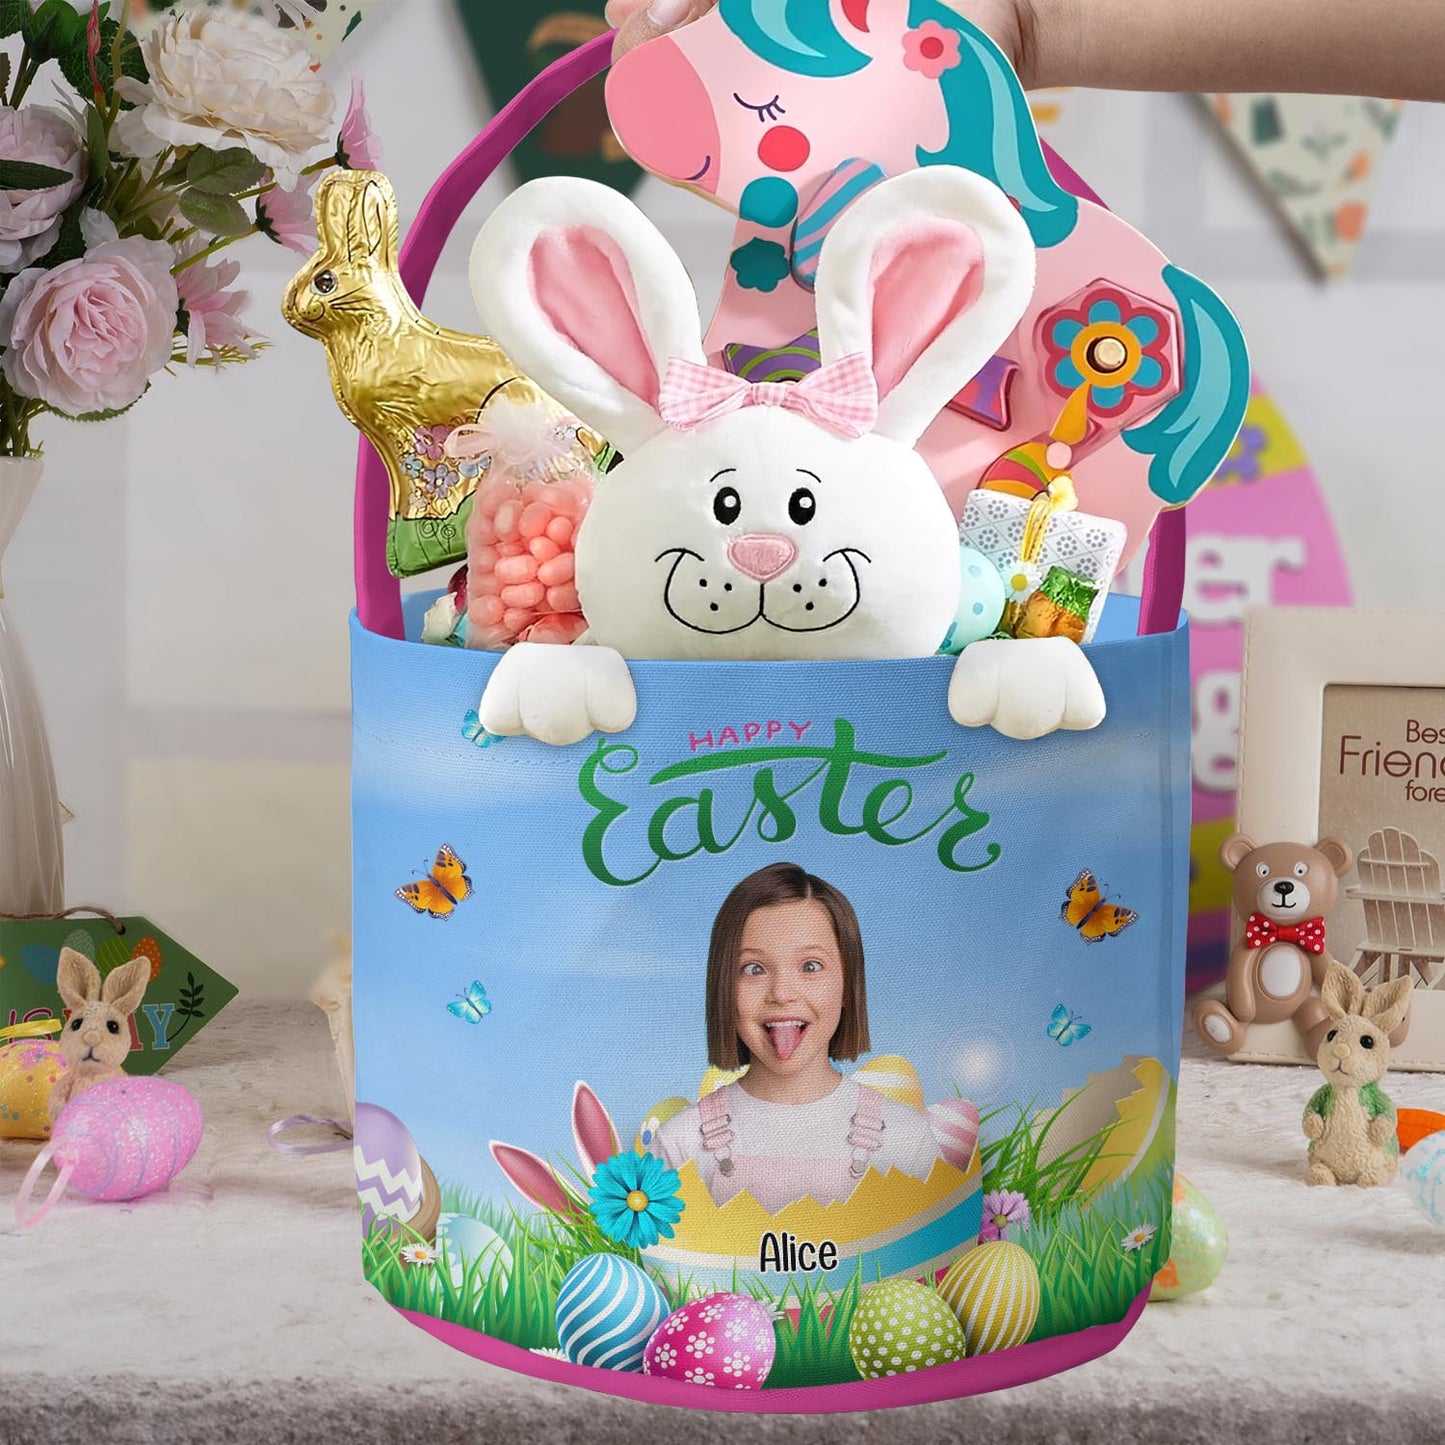 Happy Easter Kid With Easter Eggs - Personalized Photo Easter Basket